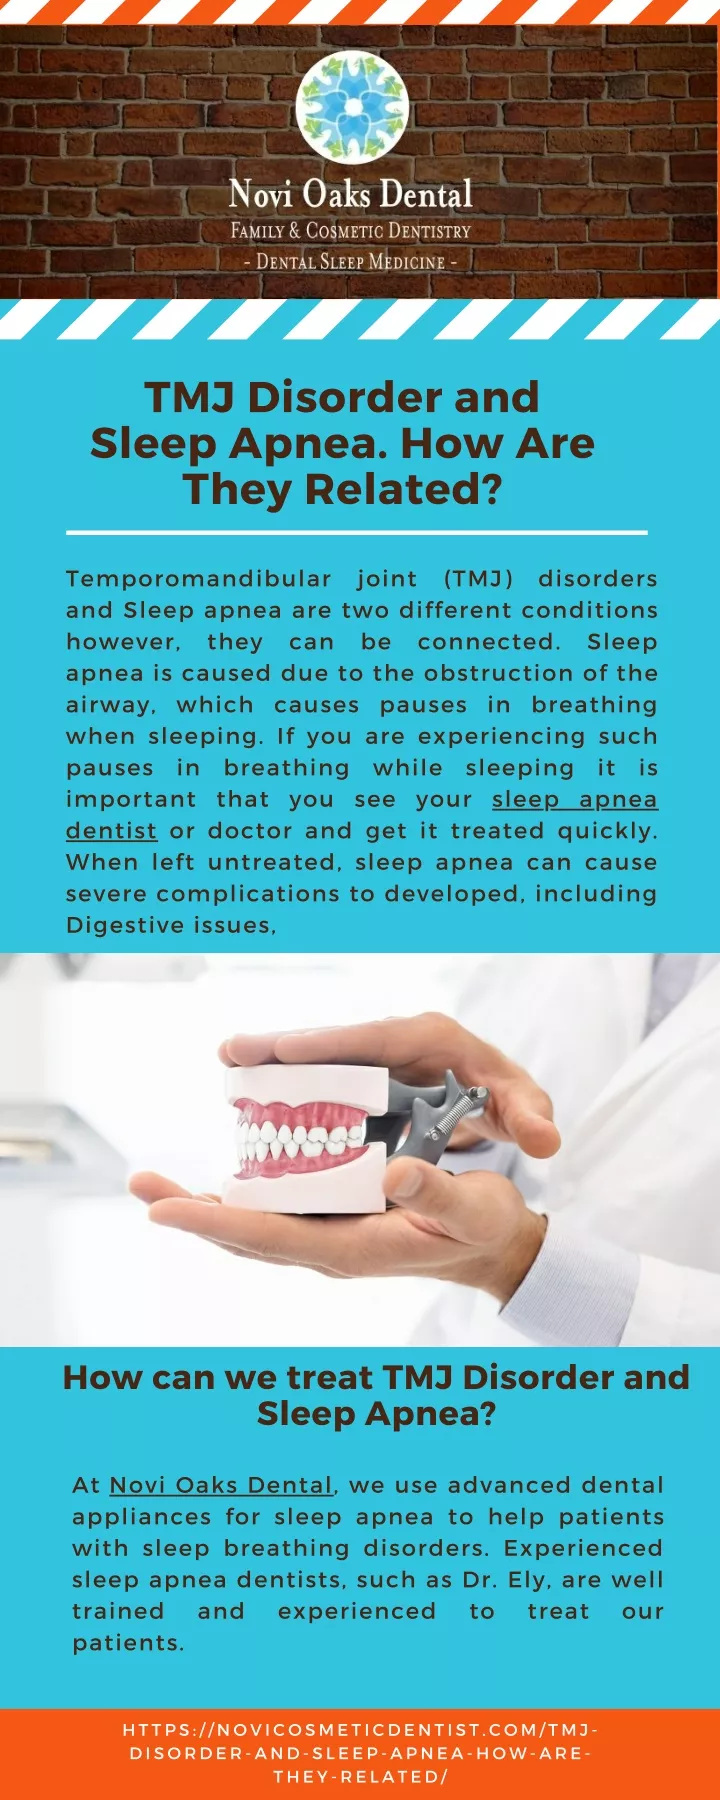 tmj disorder and sleep apnea how are they related